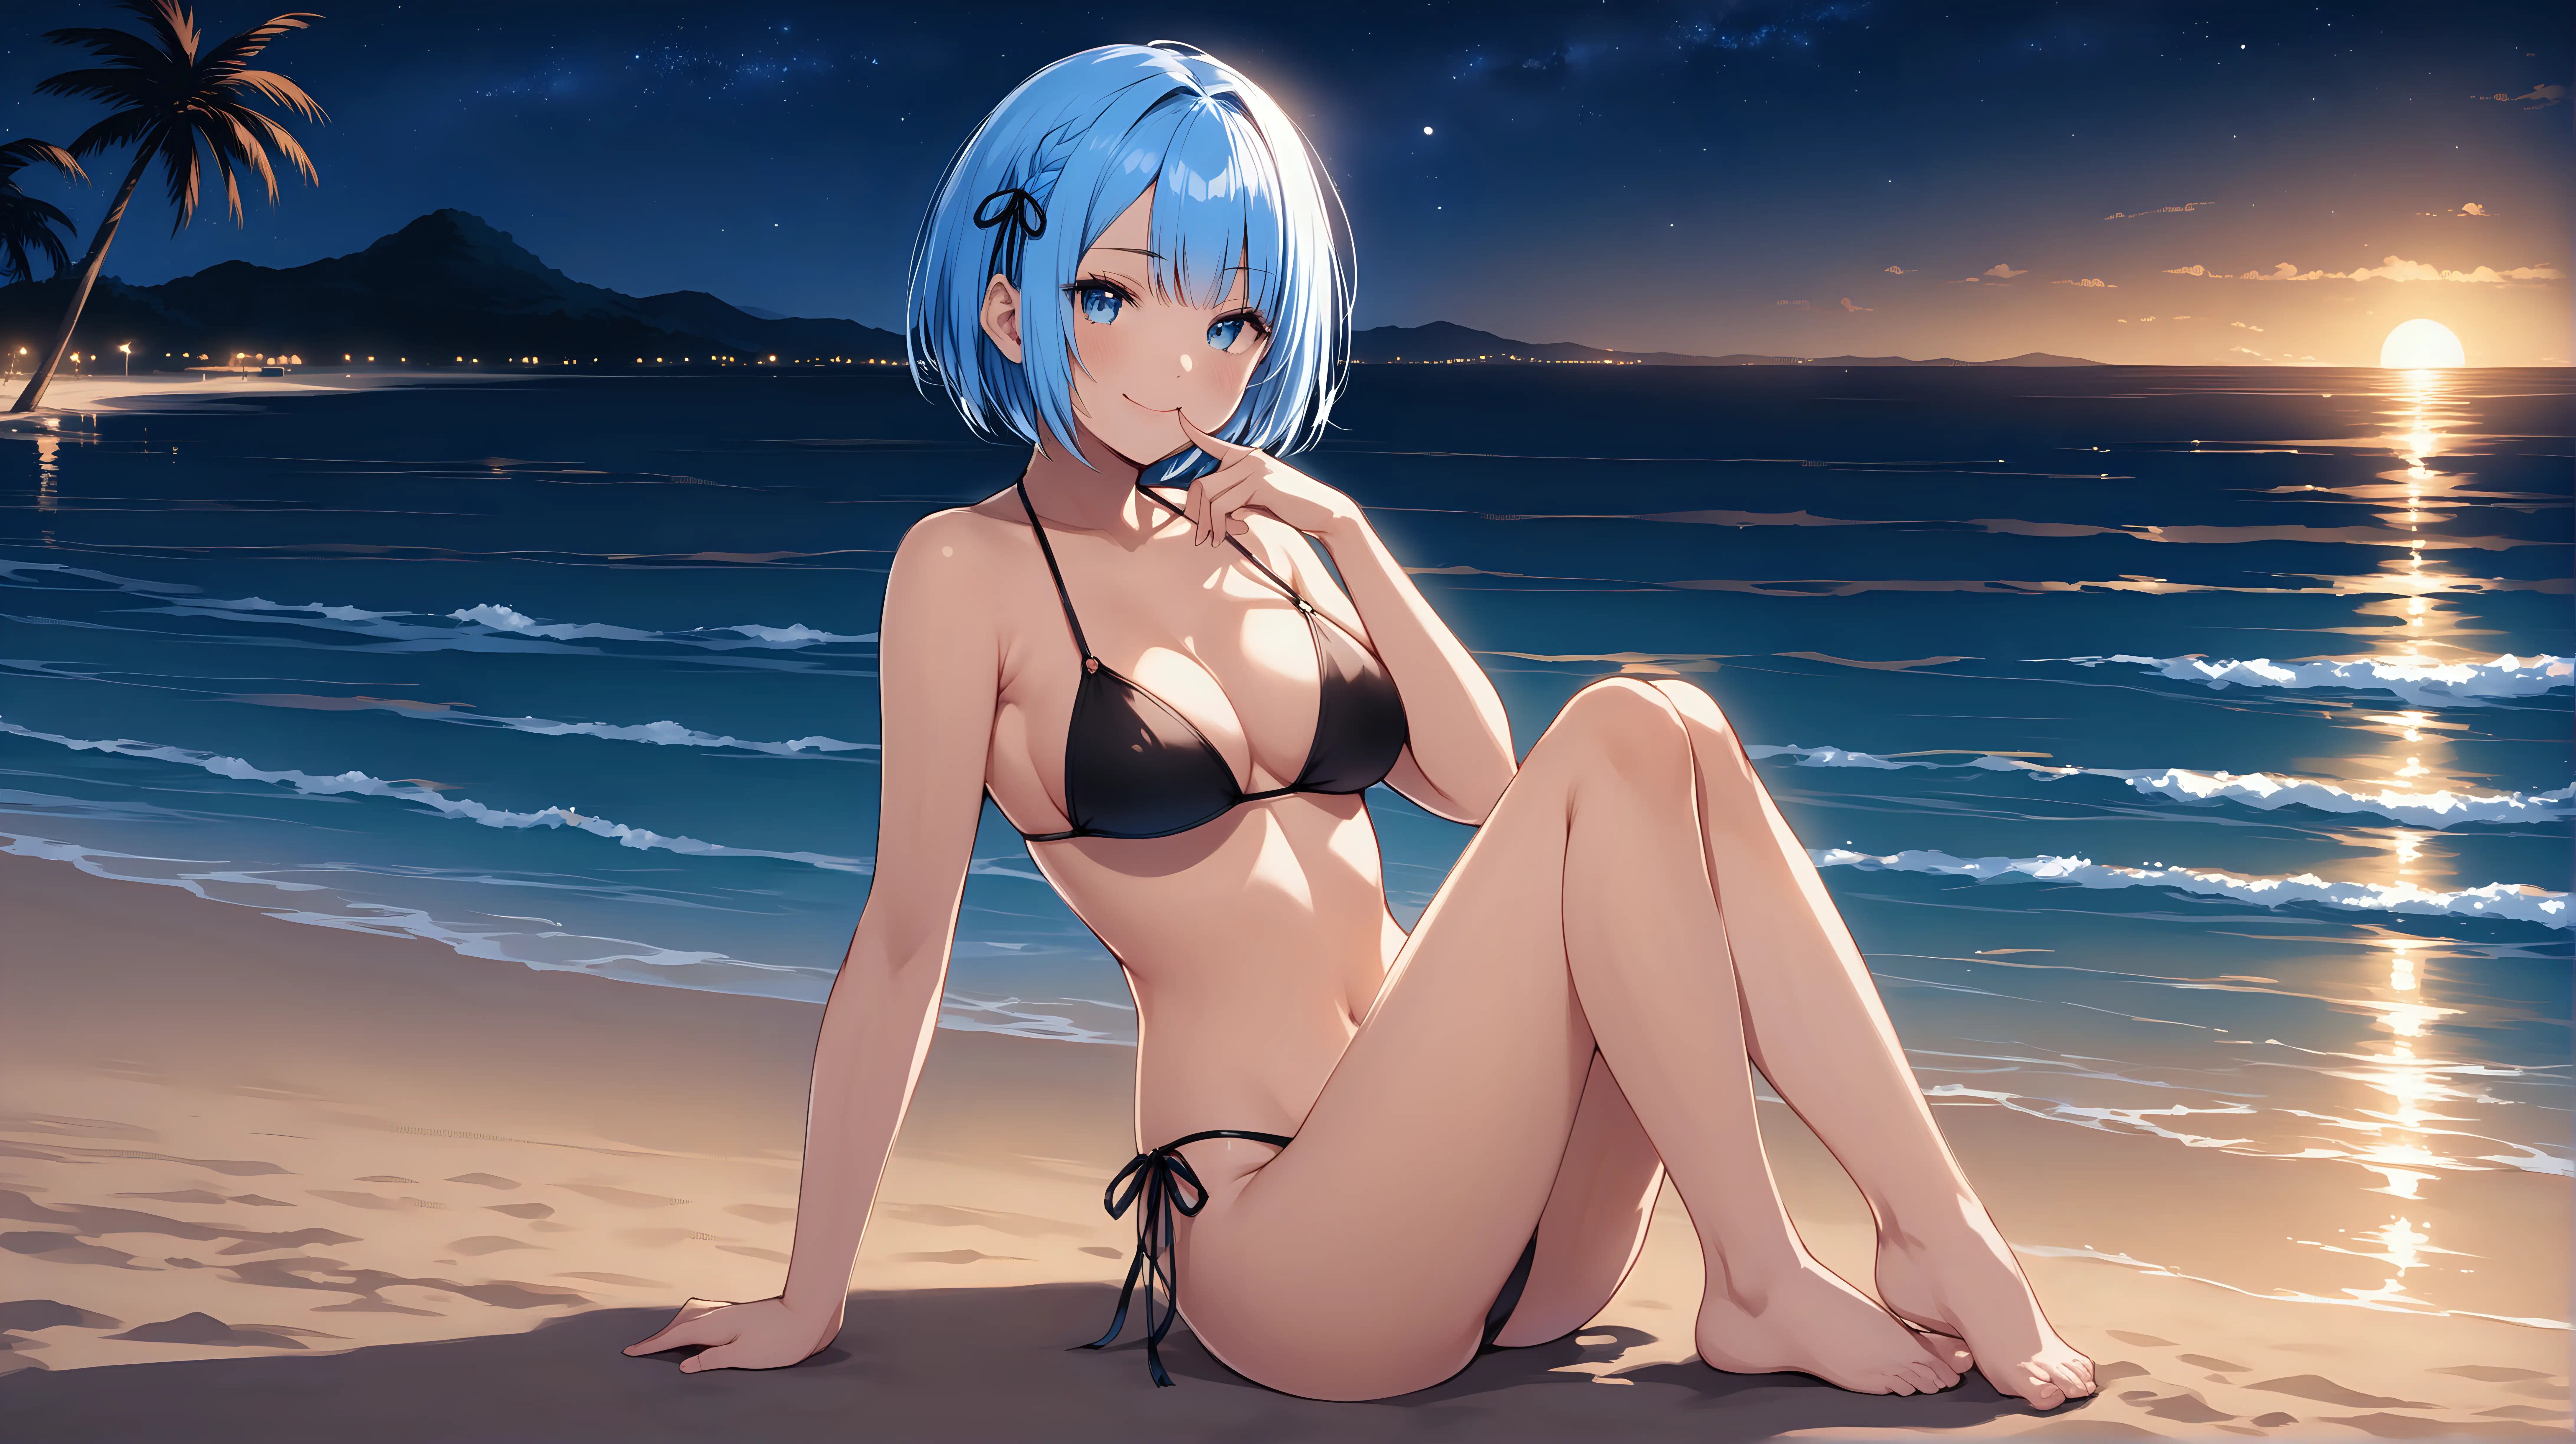 Draw the character Rem, high quality, sitting in a striking pose, alone at the beach, at night, wearing a bikini, she is smiling at the viewer